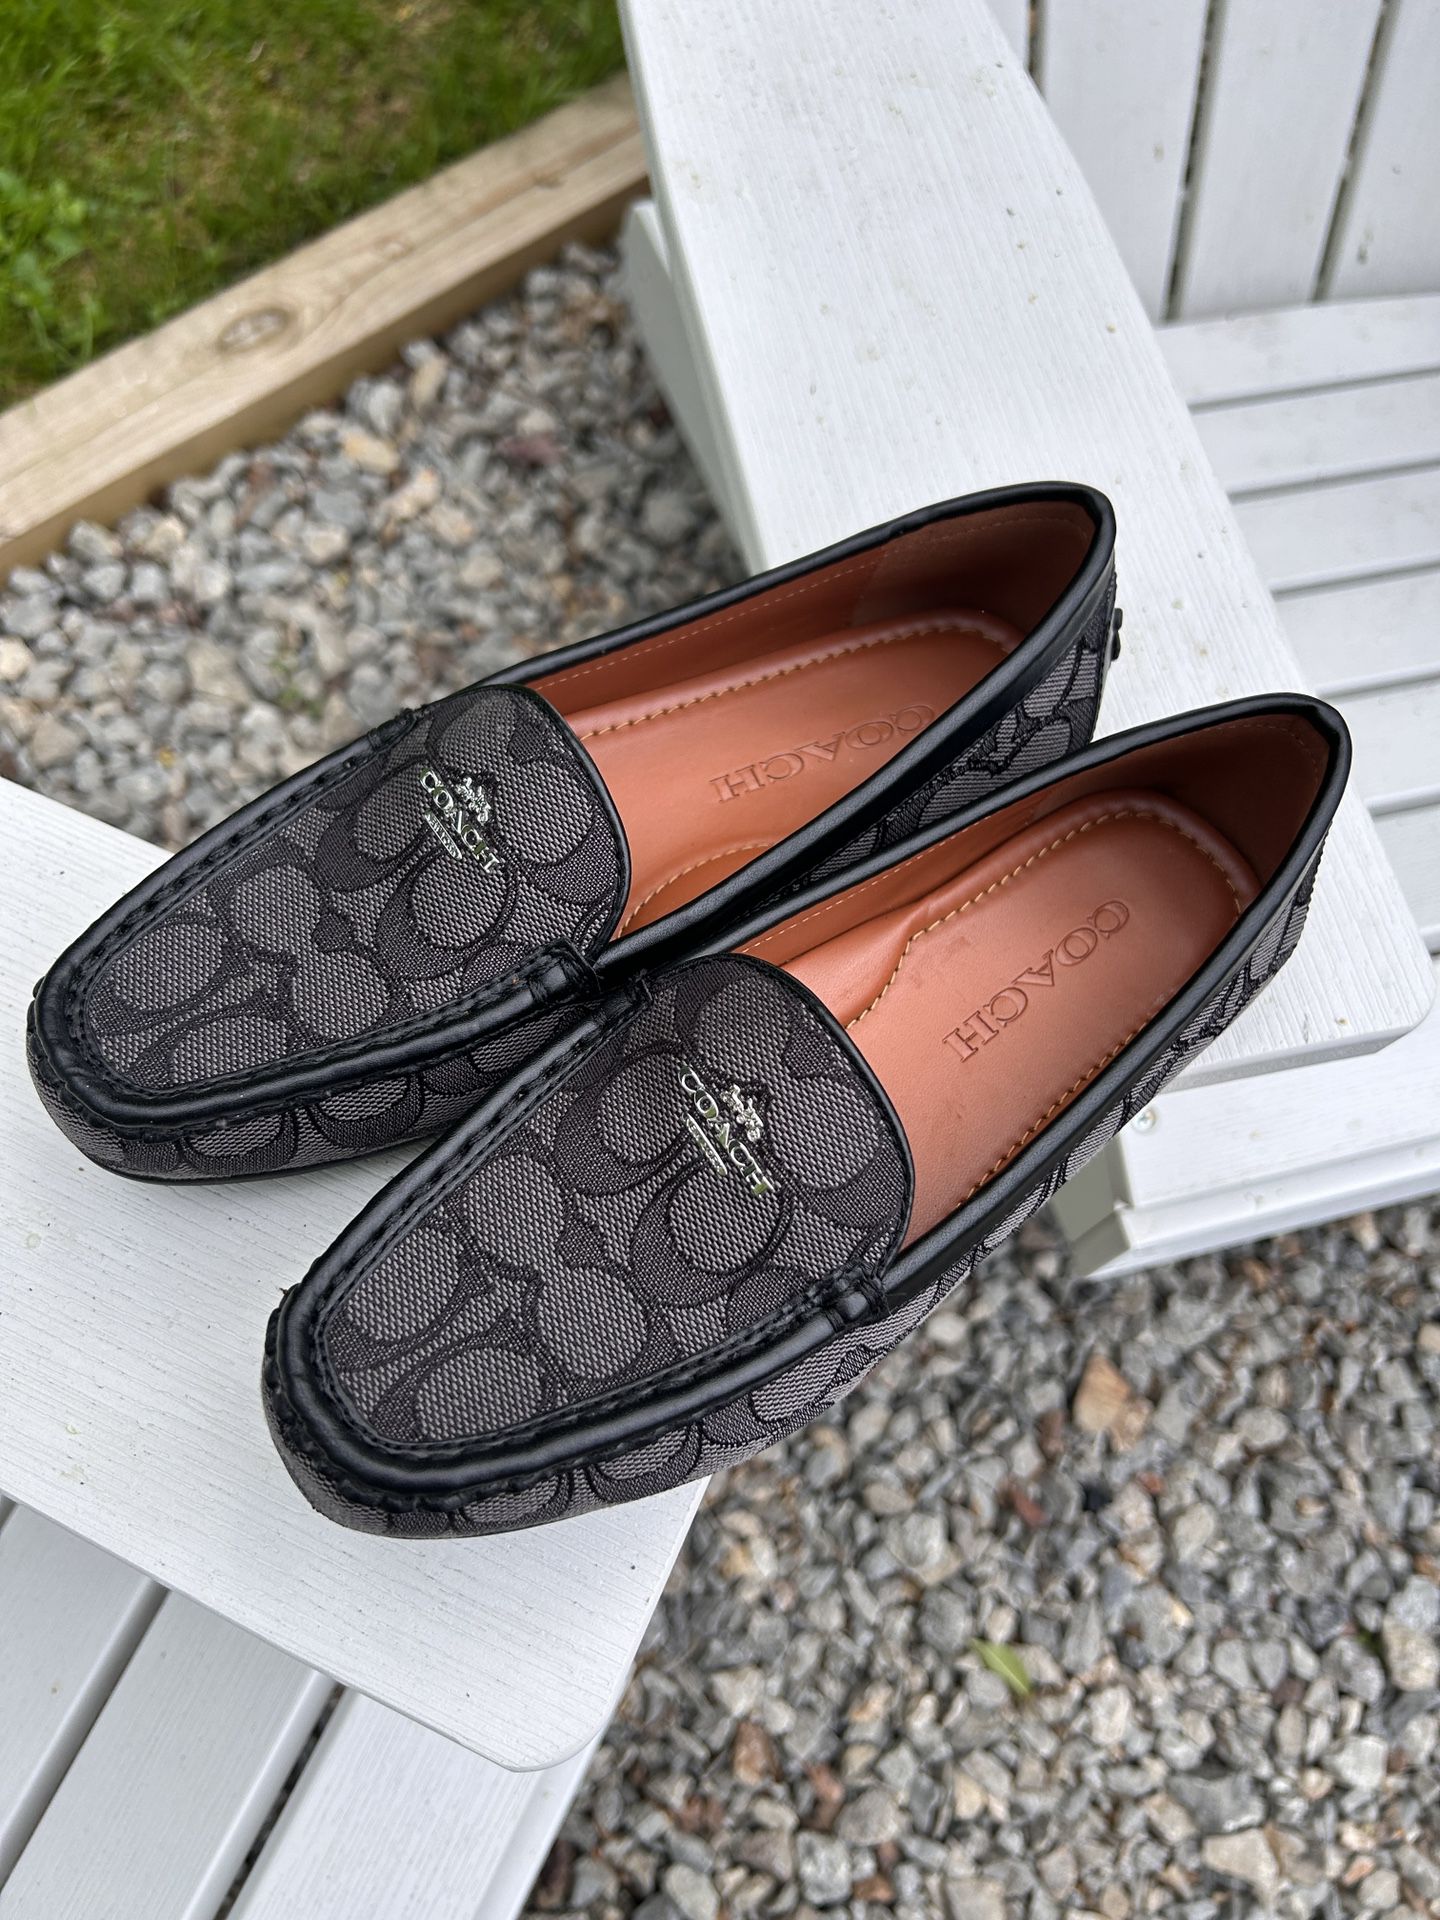 Coach Black Signature Loafers - Never Worn